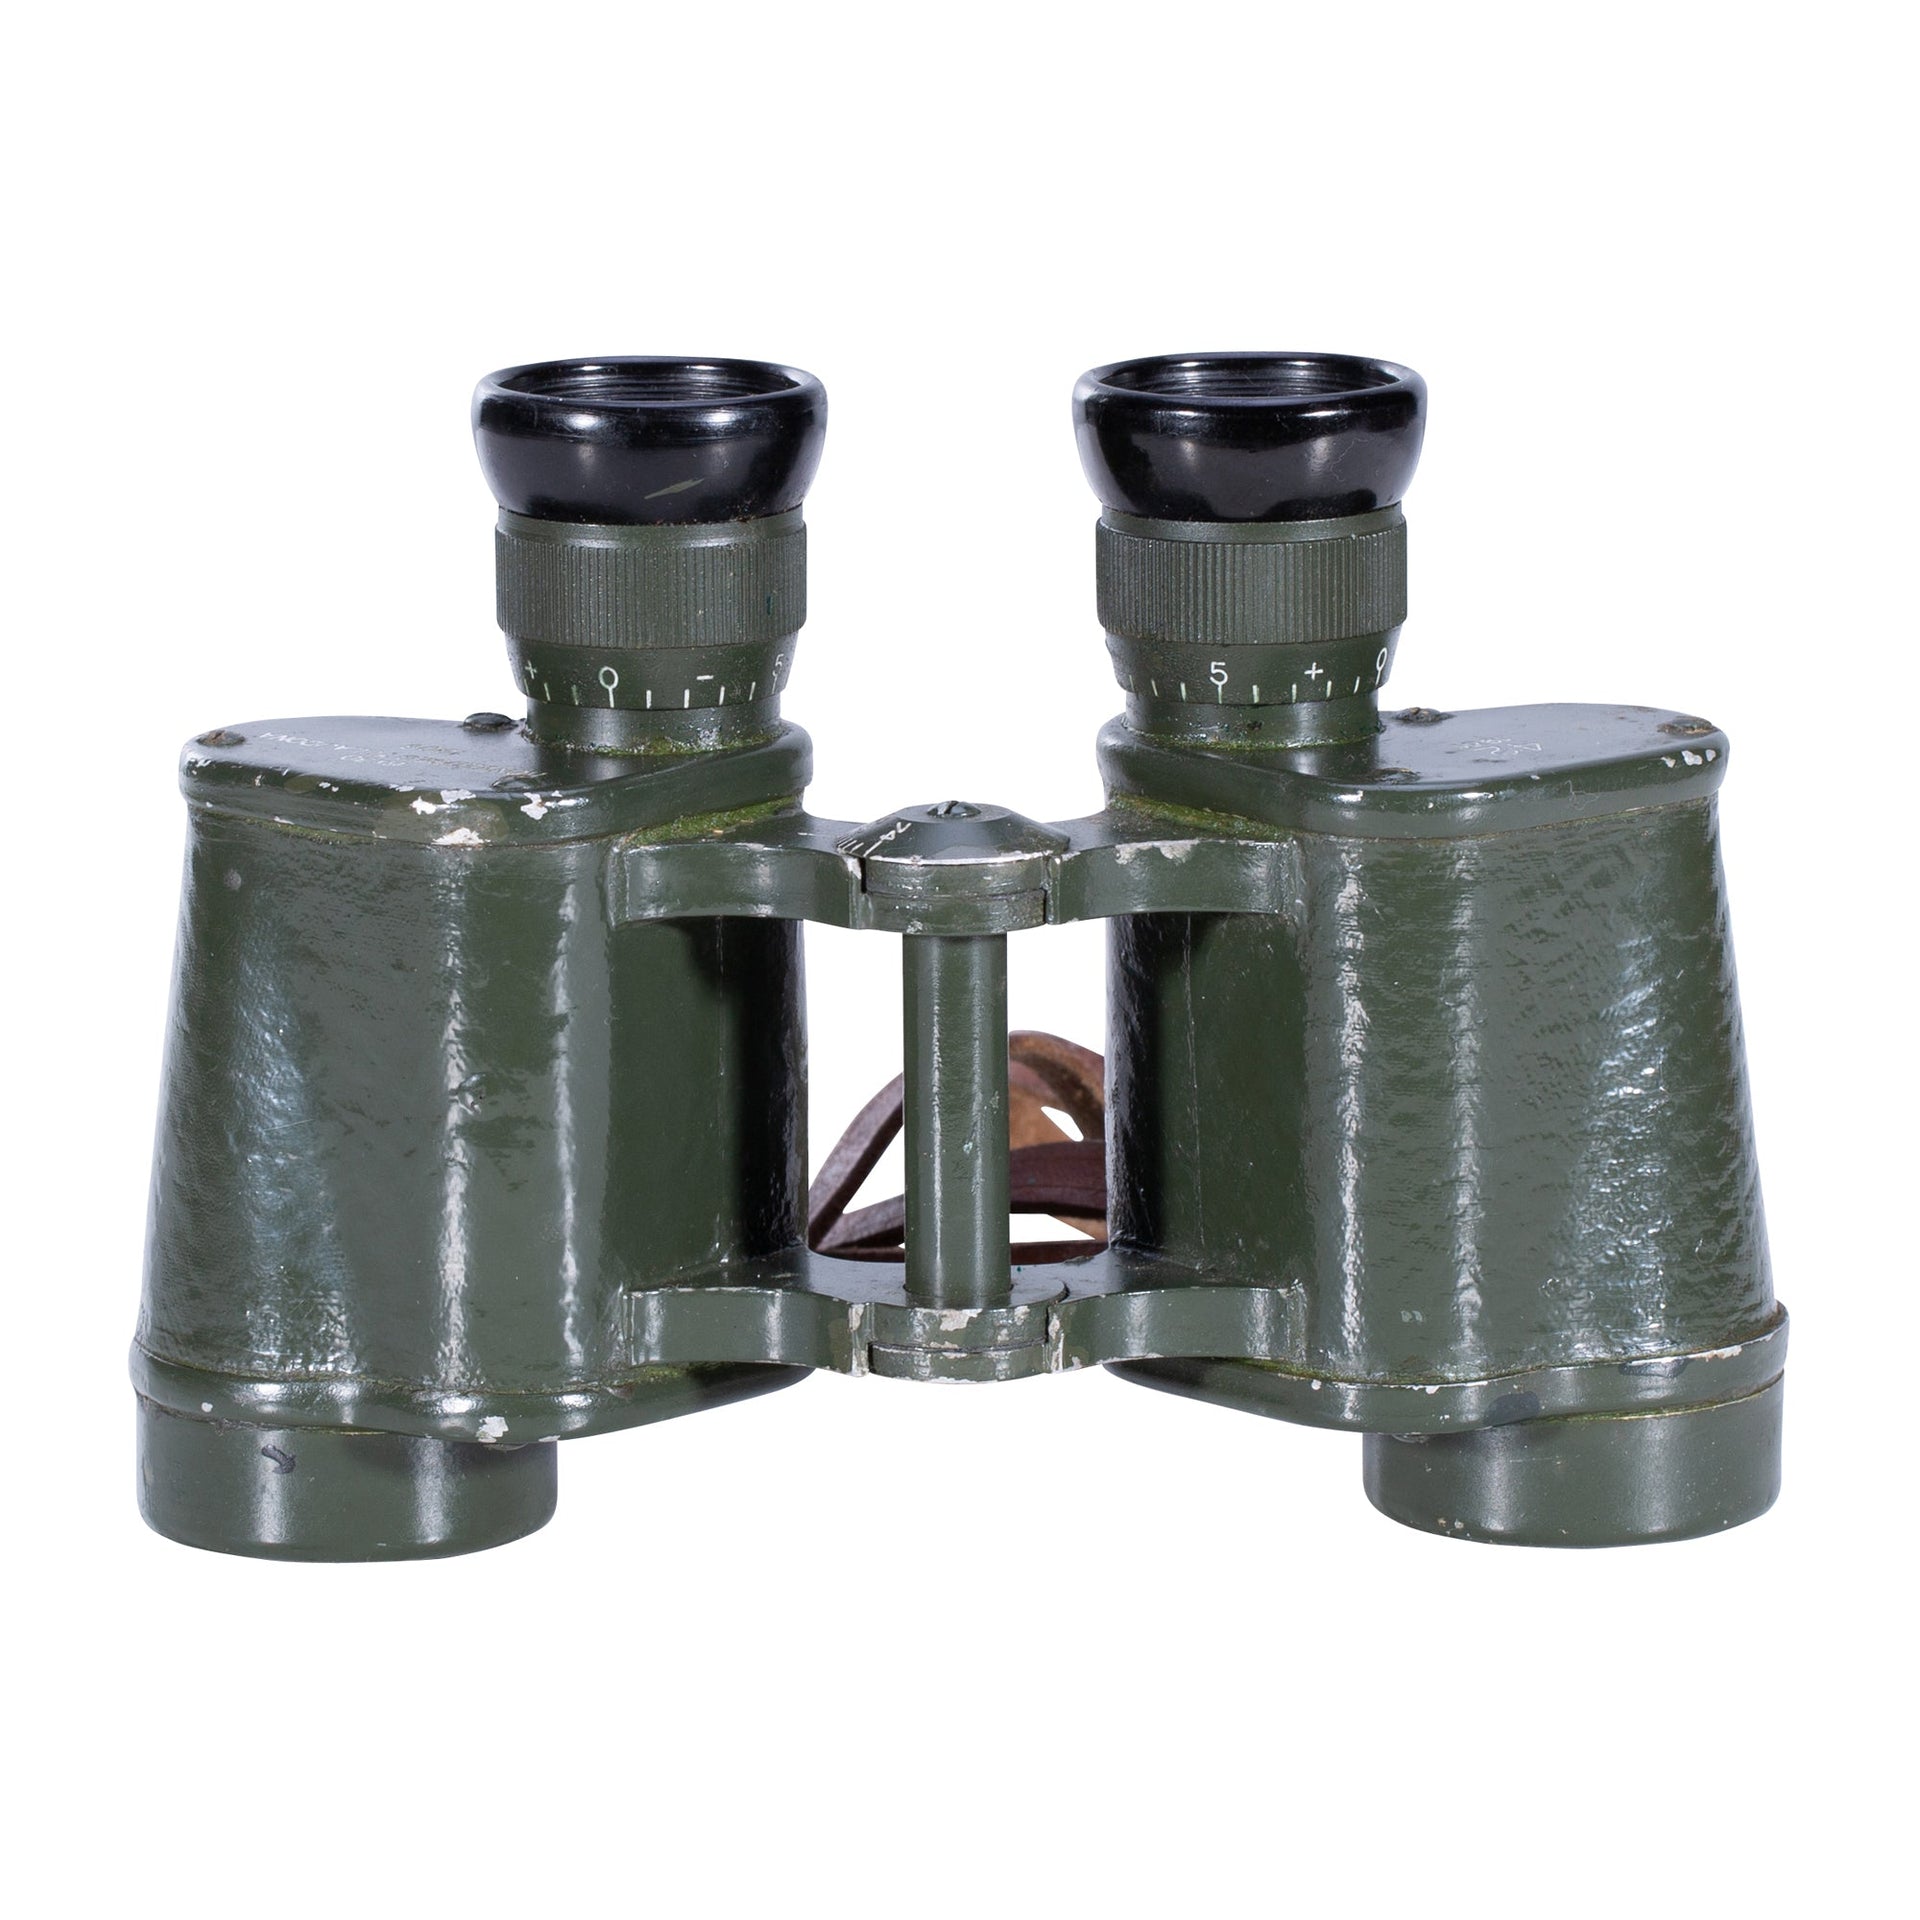 Used Hungarian Binoculars 6x30 with Leather Case